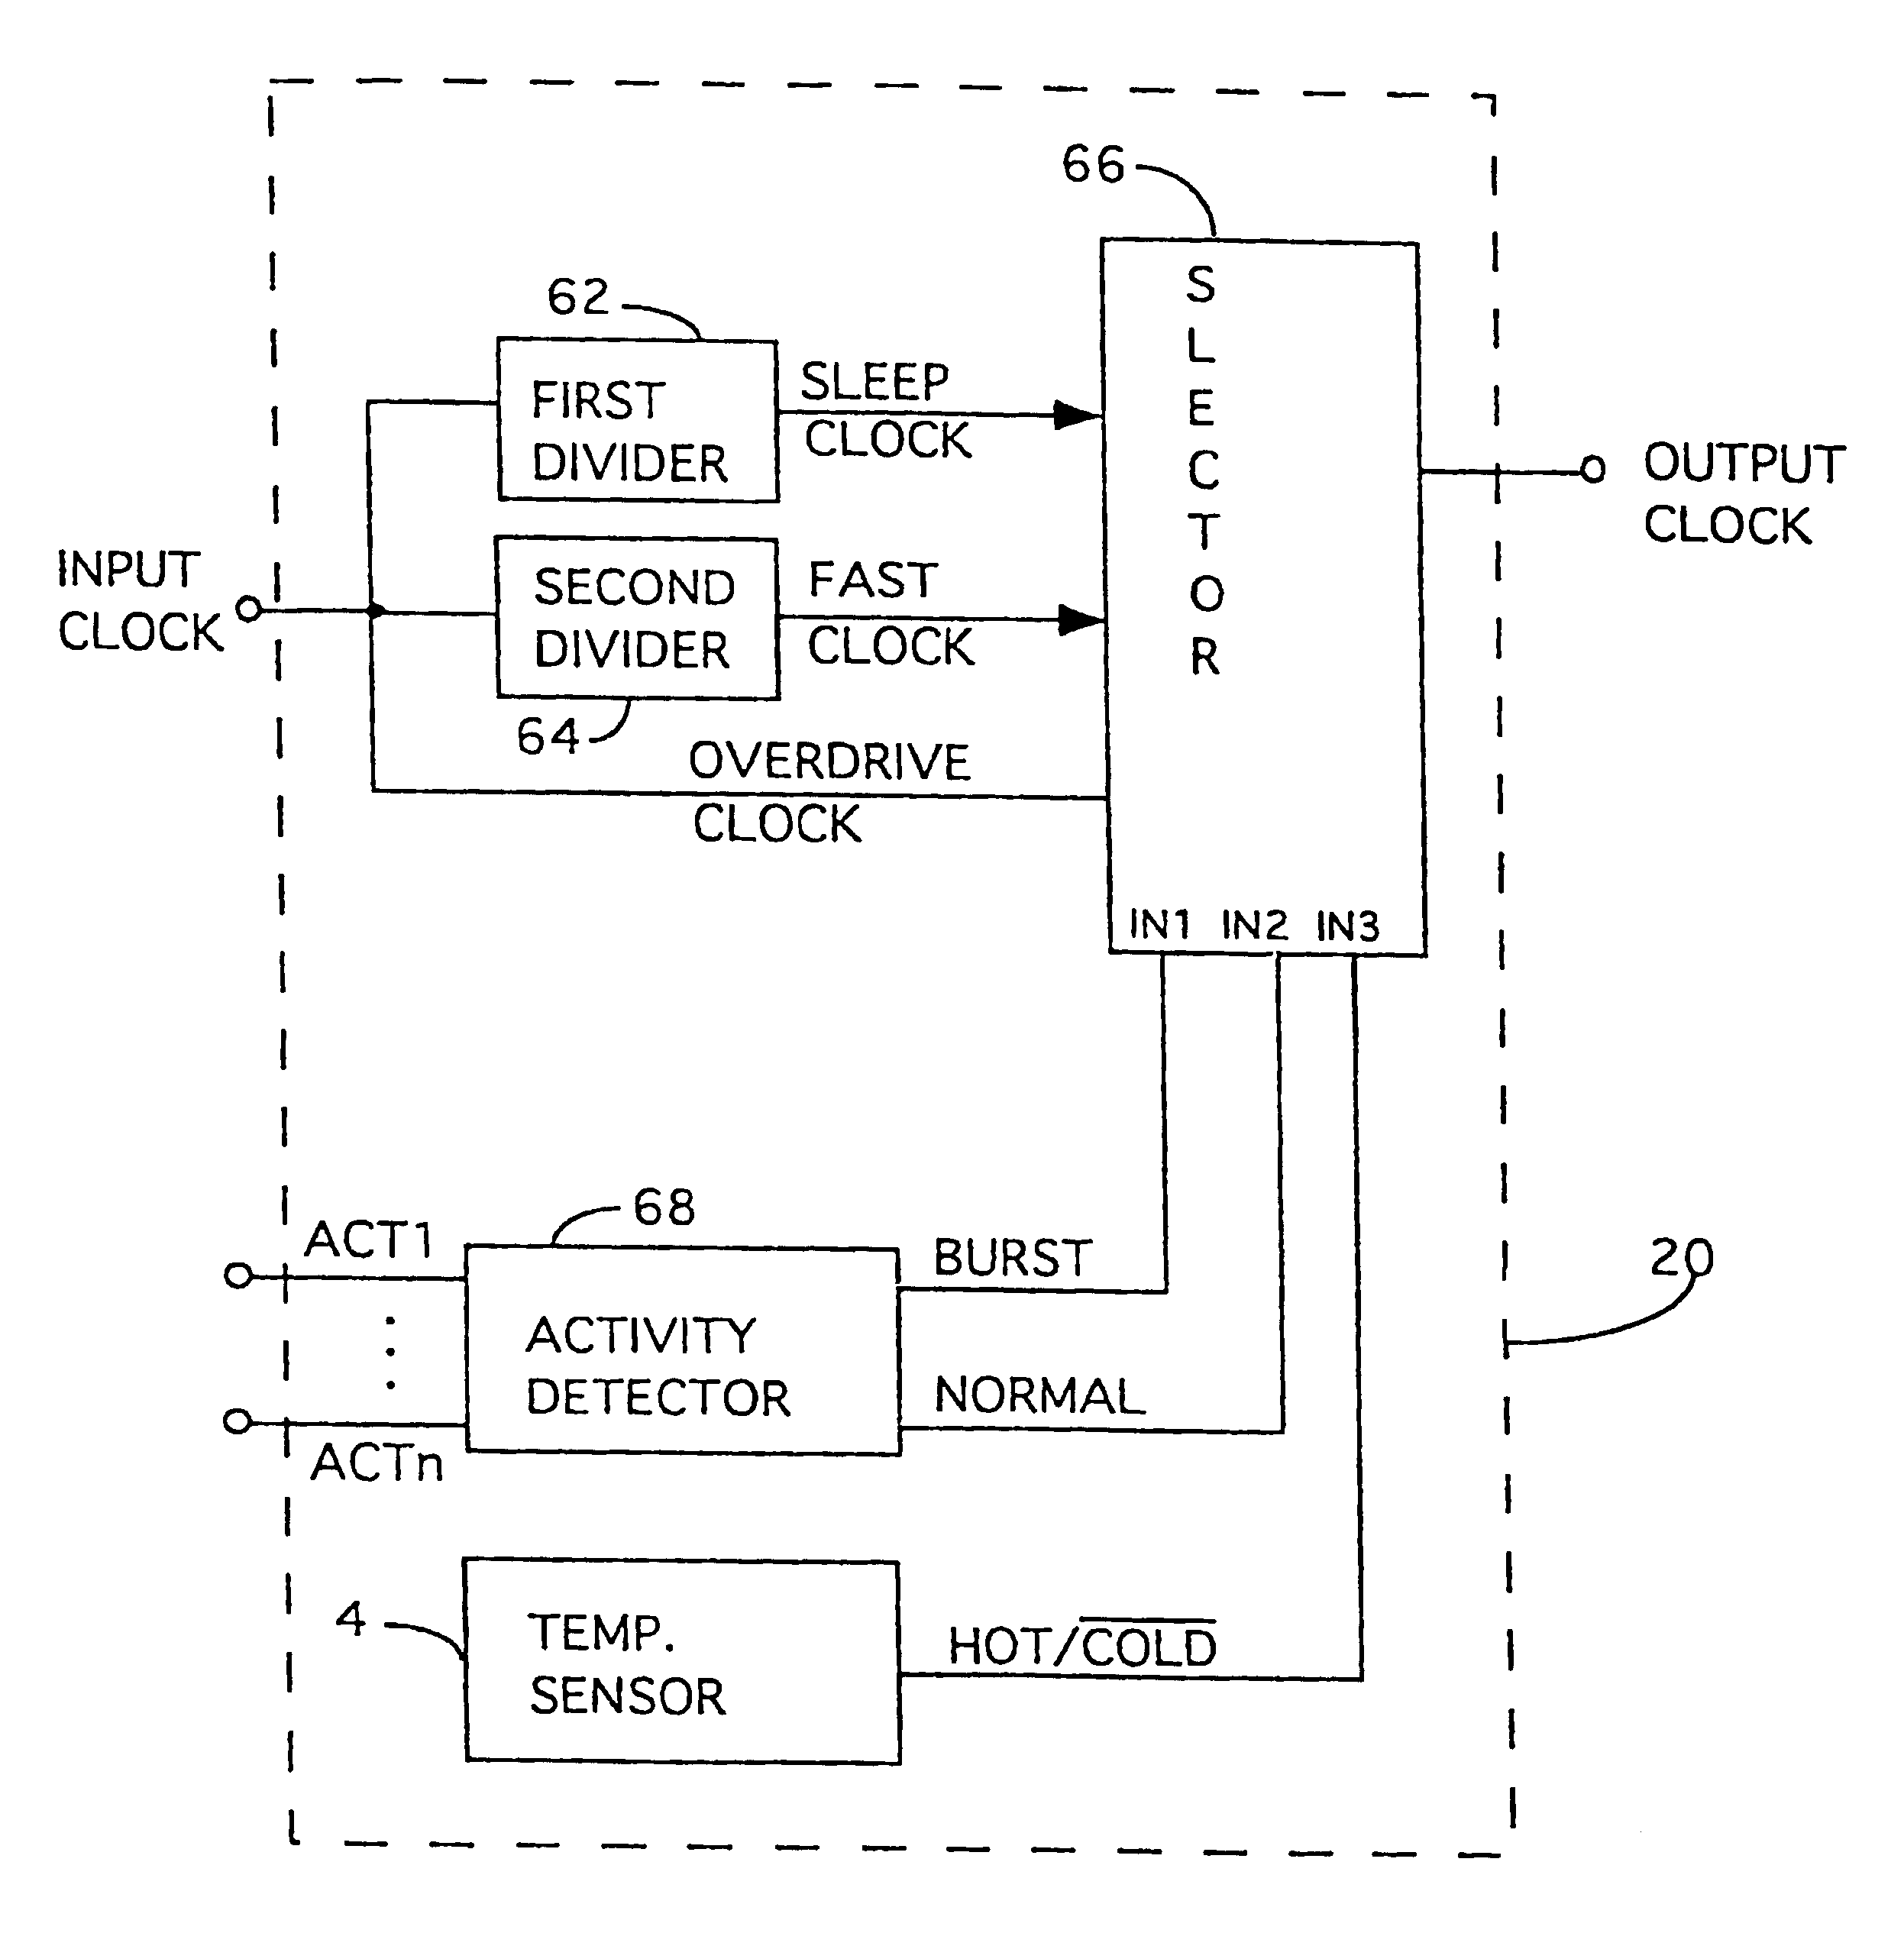 Thermal and power management for computer systems